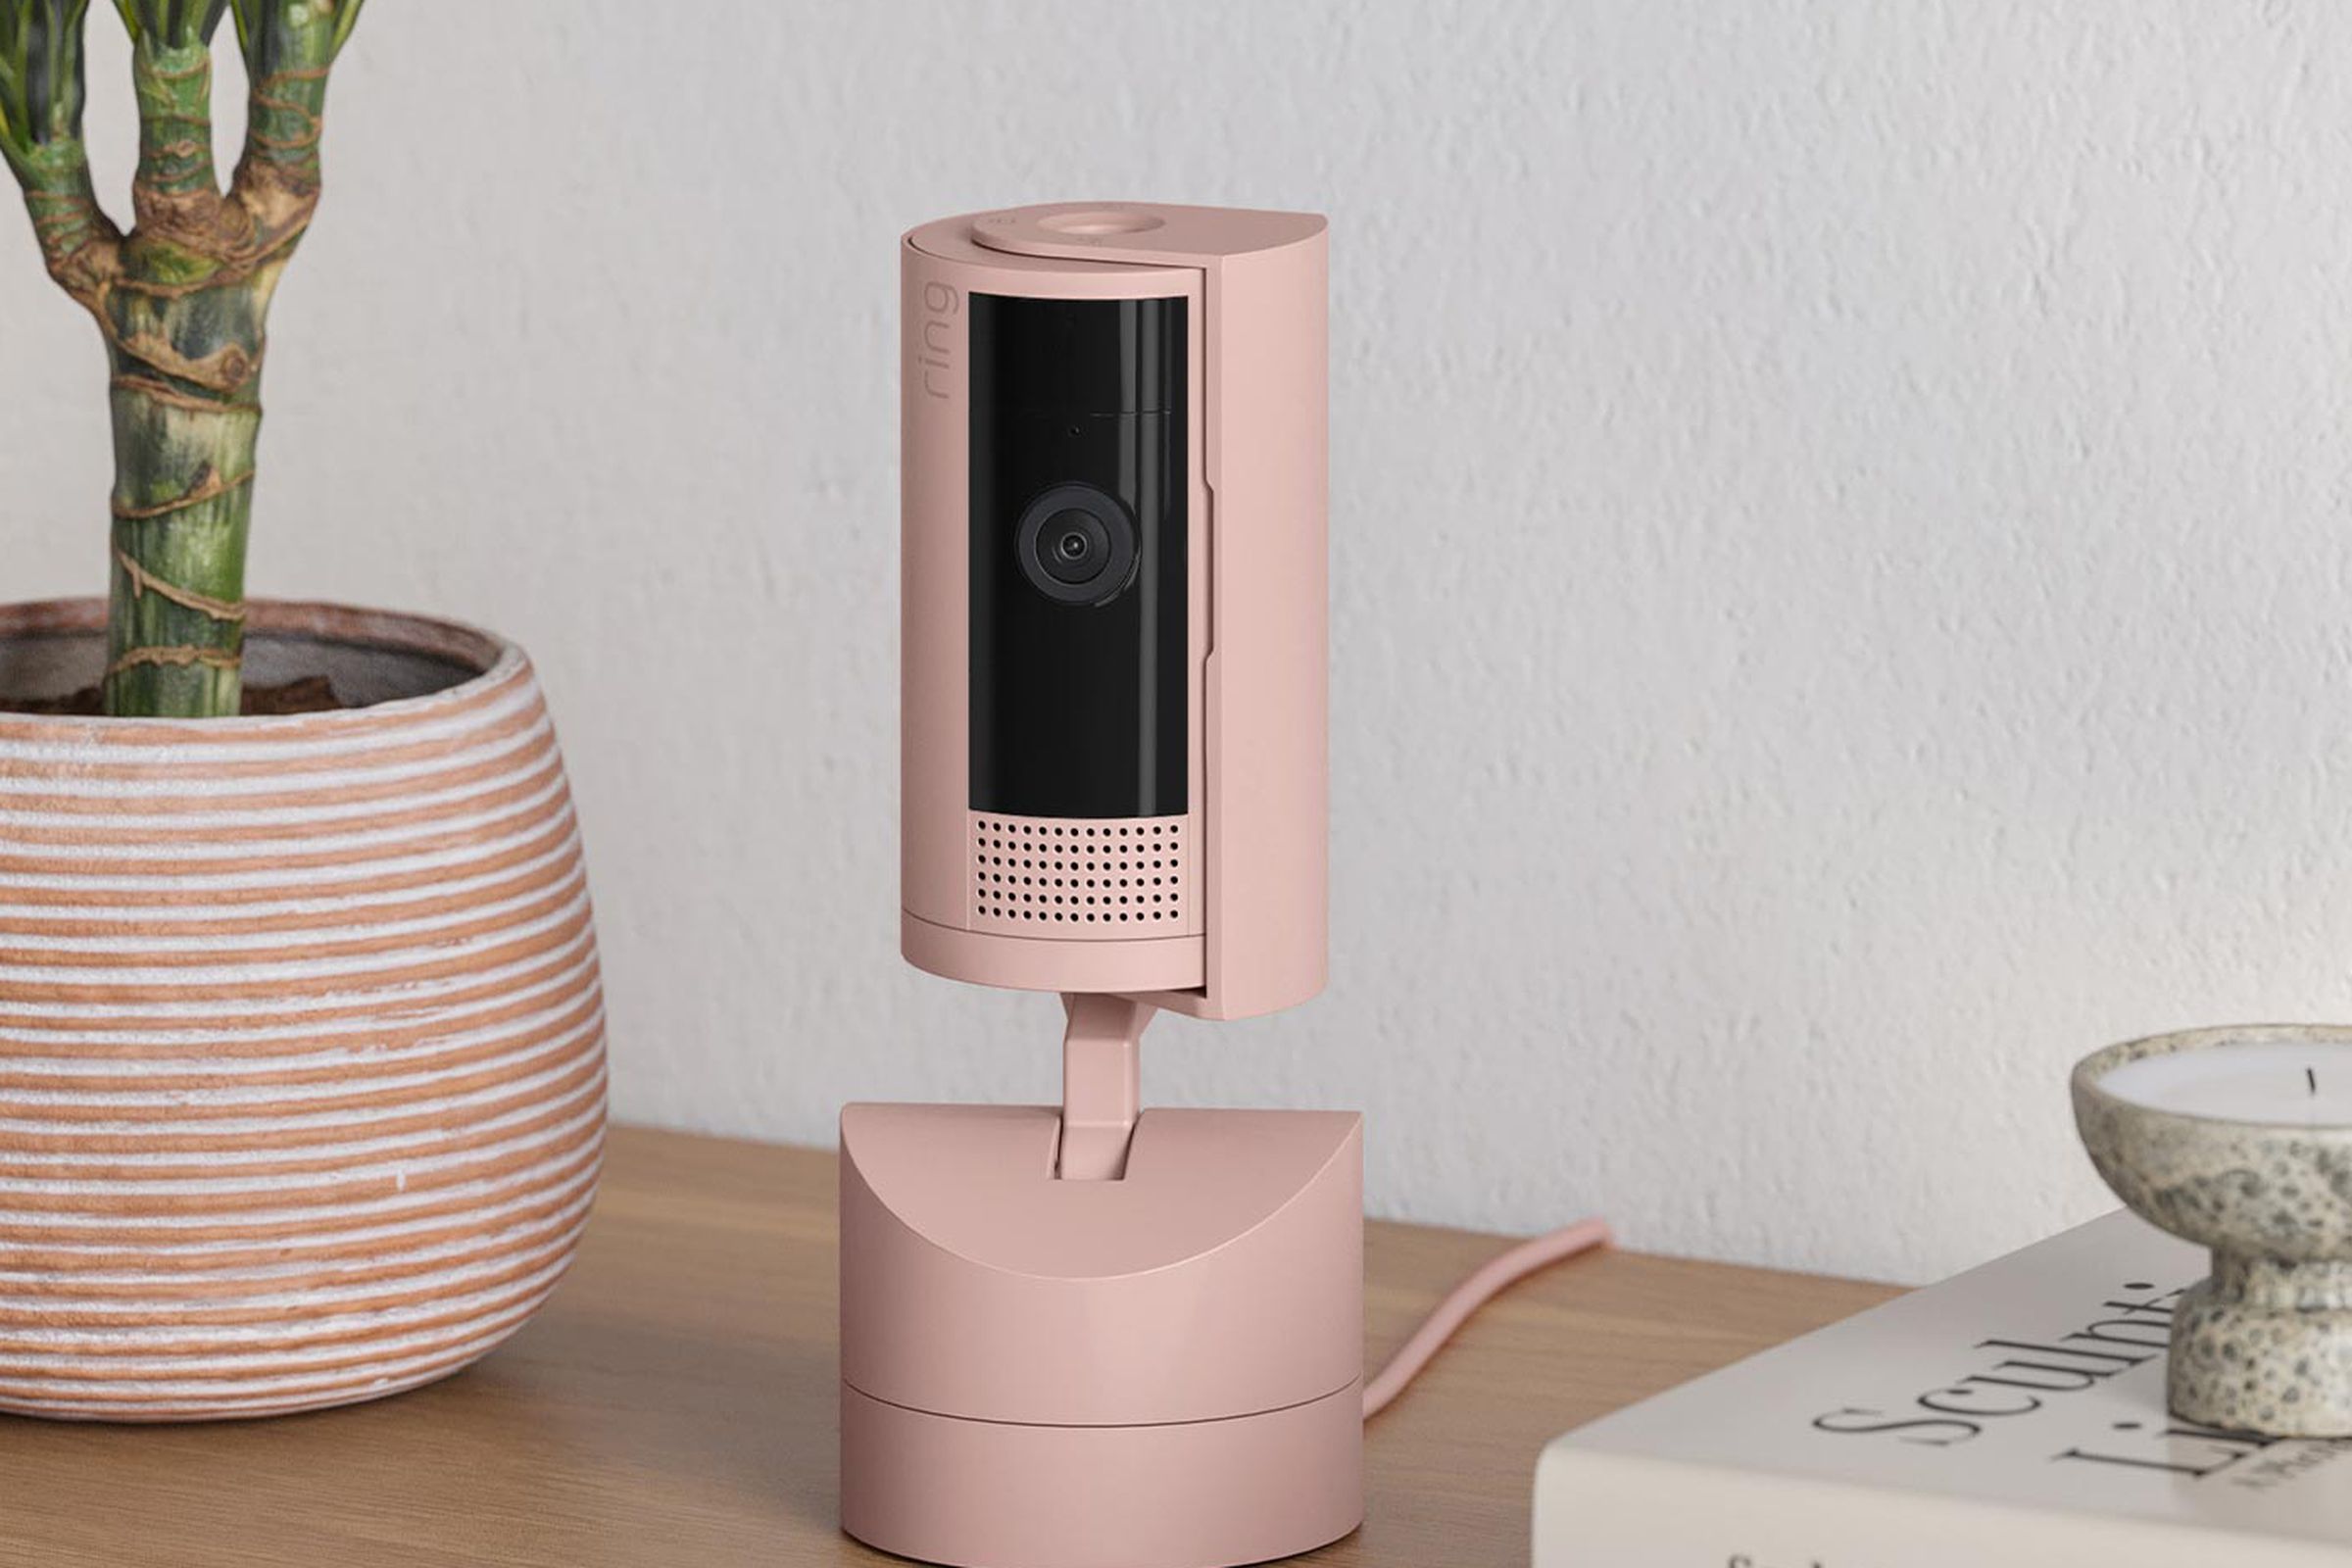 A pink security camera on a table.